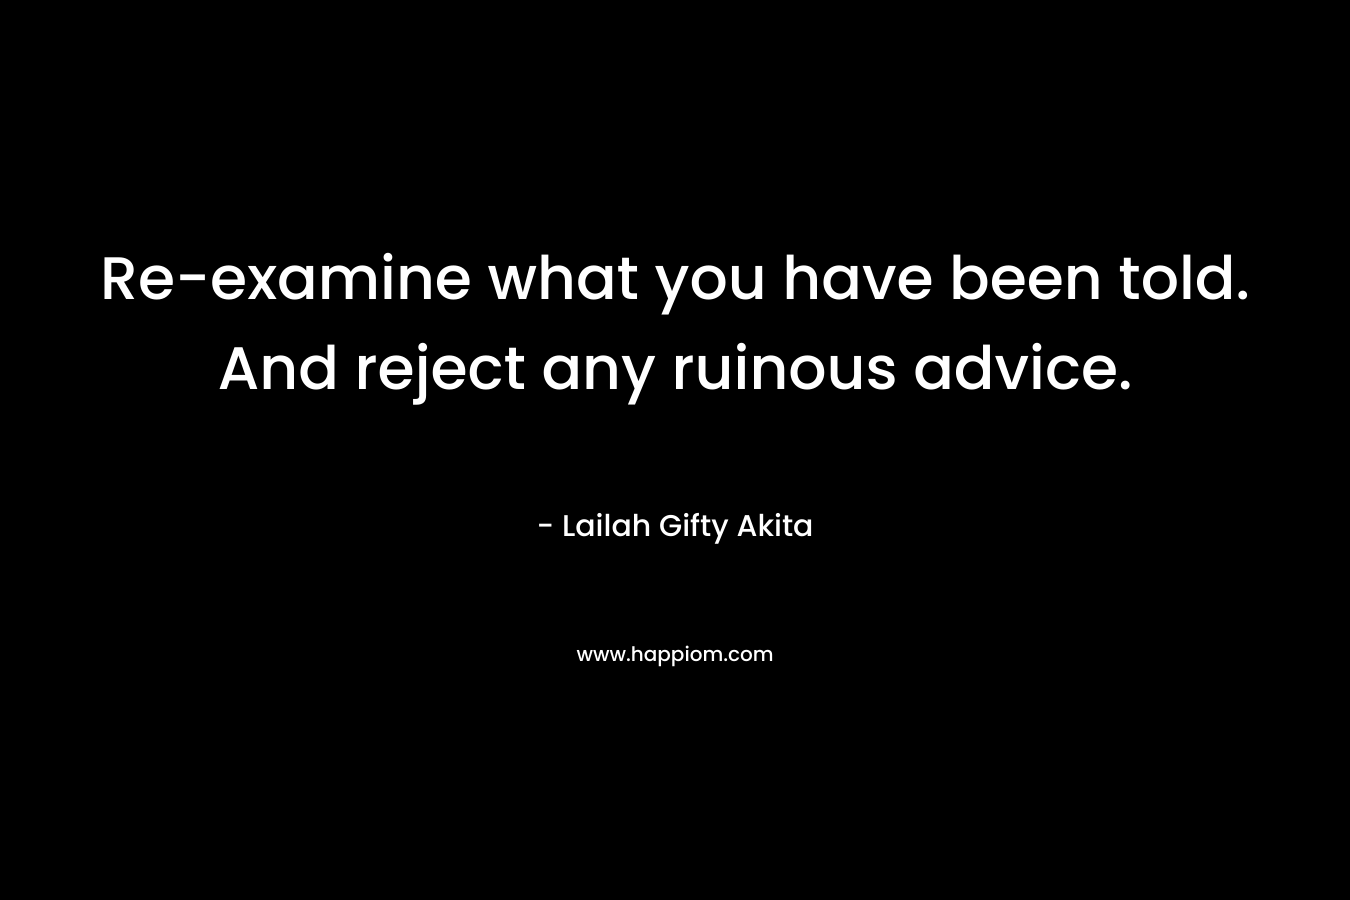 Re-examine what you have been told. And reject any ruinous advice.